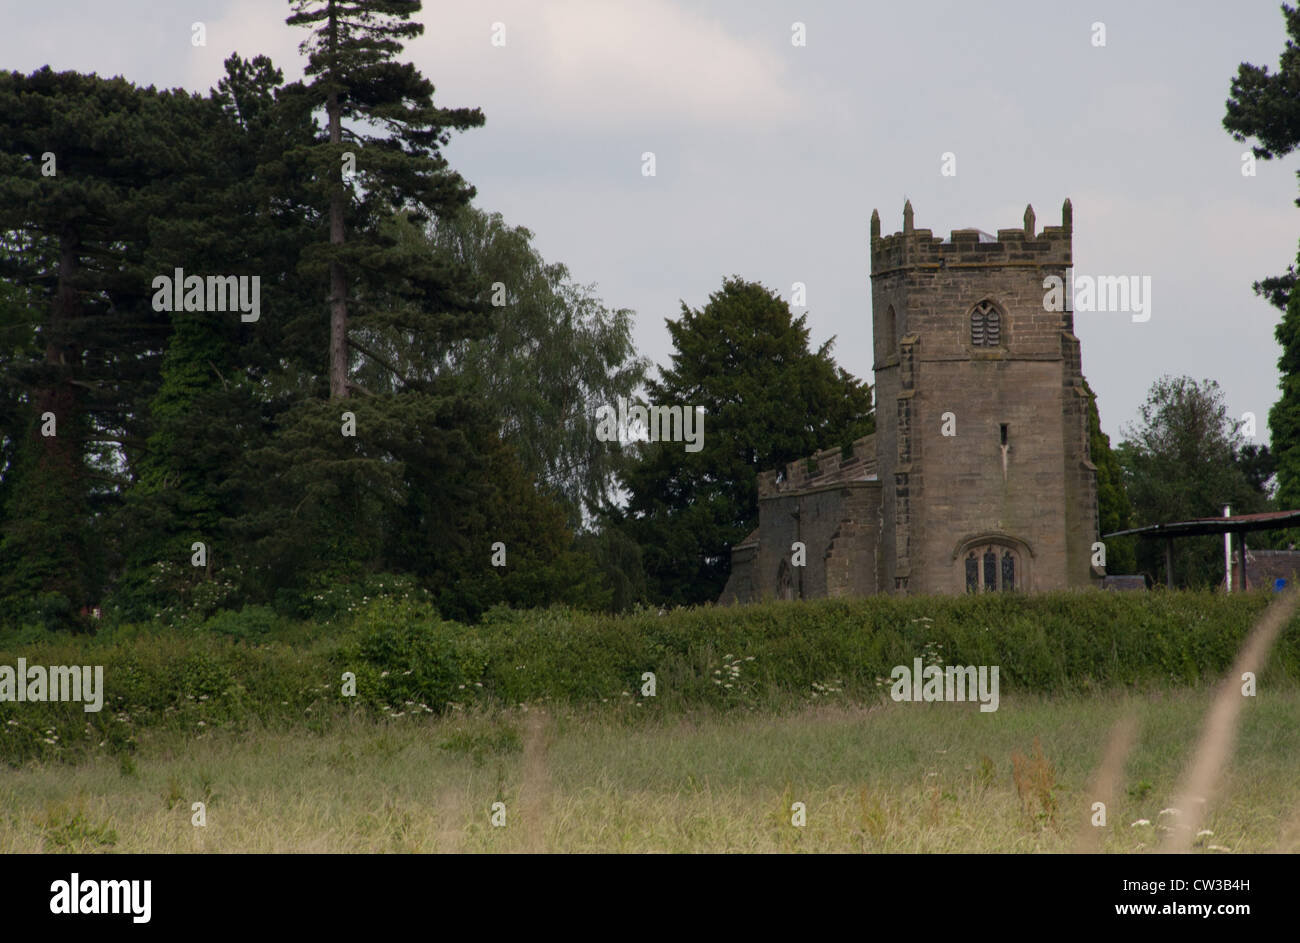 The church at Burton Hastings is photographed from the moving narrow boat in Ashby canal, Warwickshire. Stock Photo